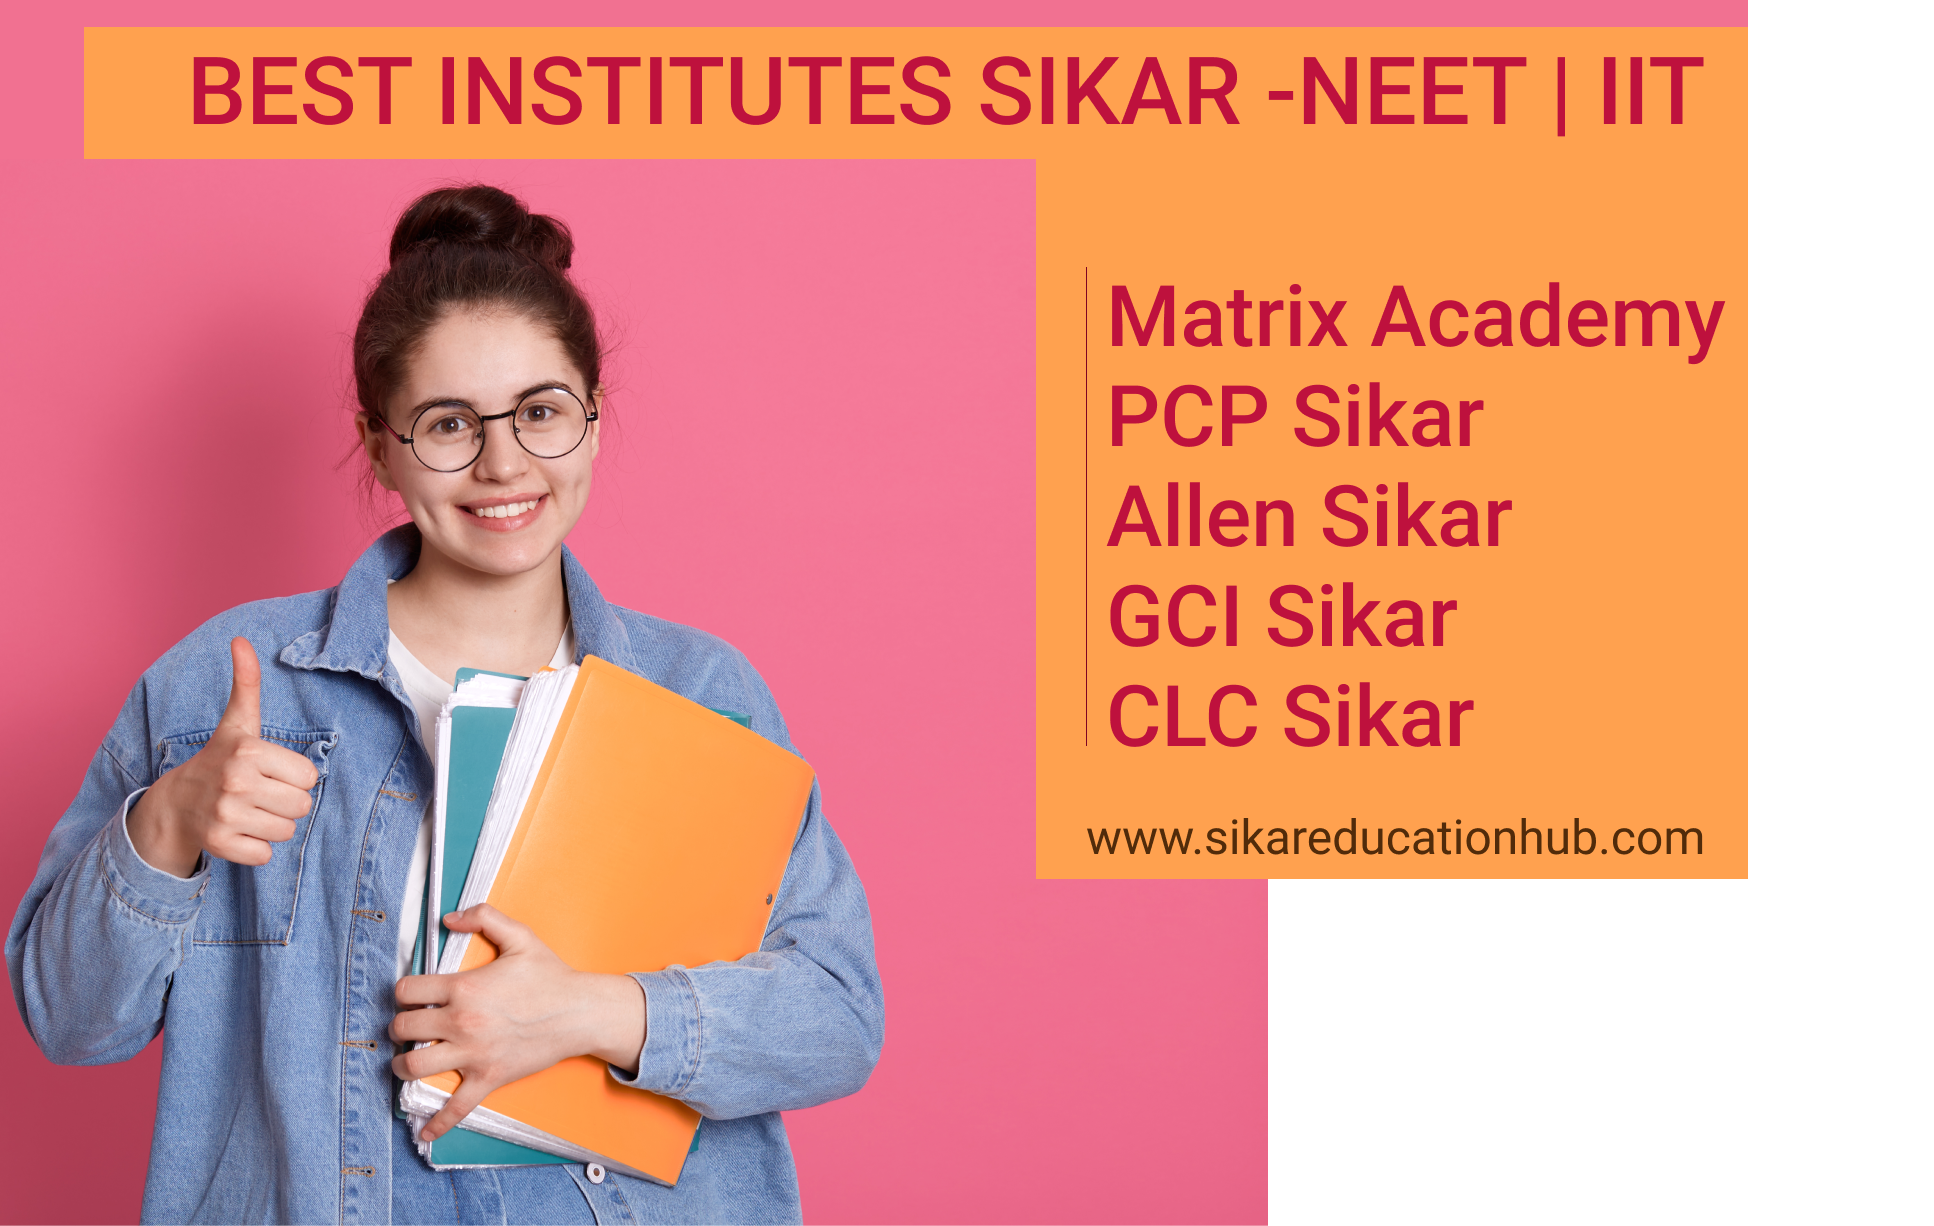 student-is-showing-best-institutes-for-neet-jee-iit-coachings-in-sikar